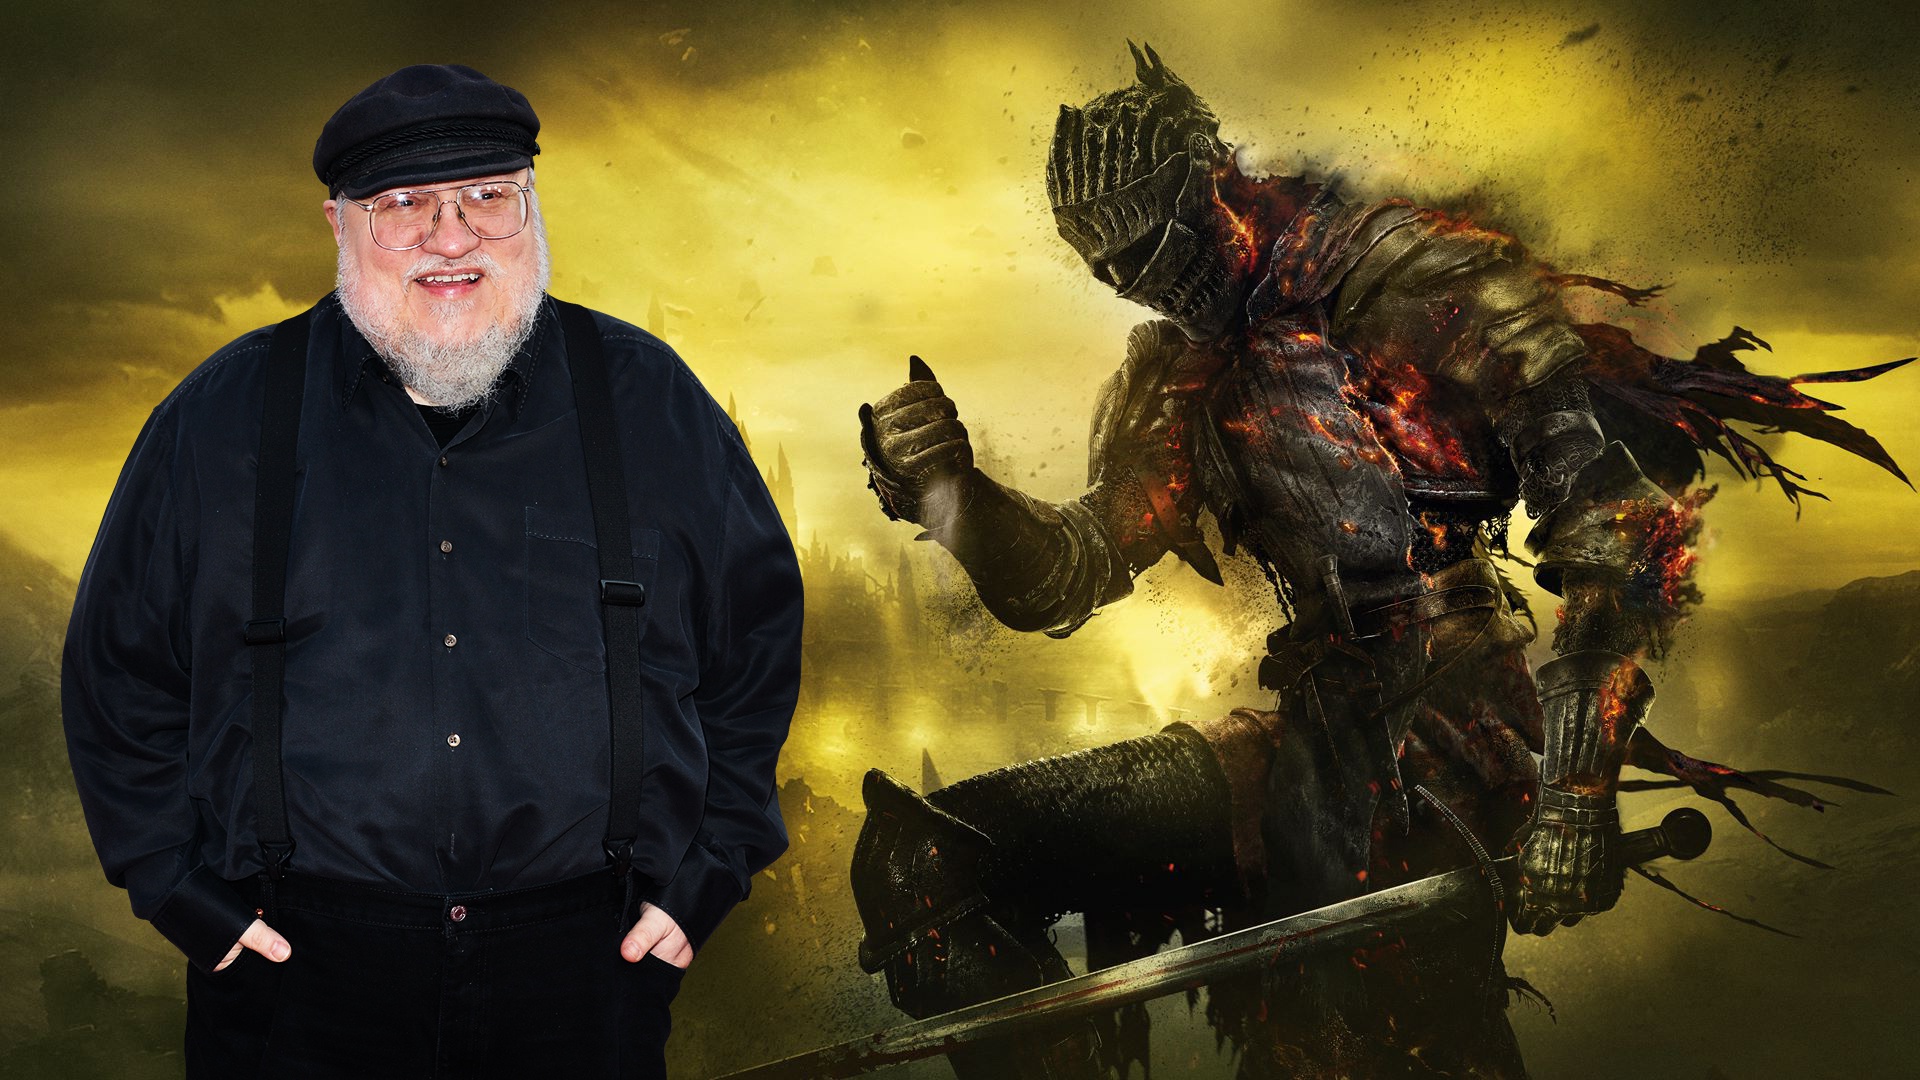 George R. R. Martin FromSoftware